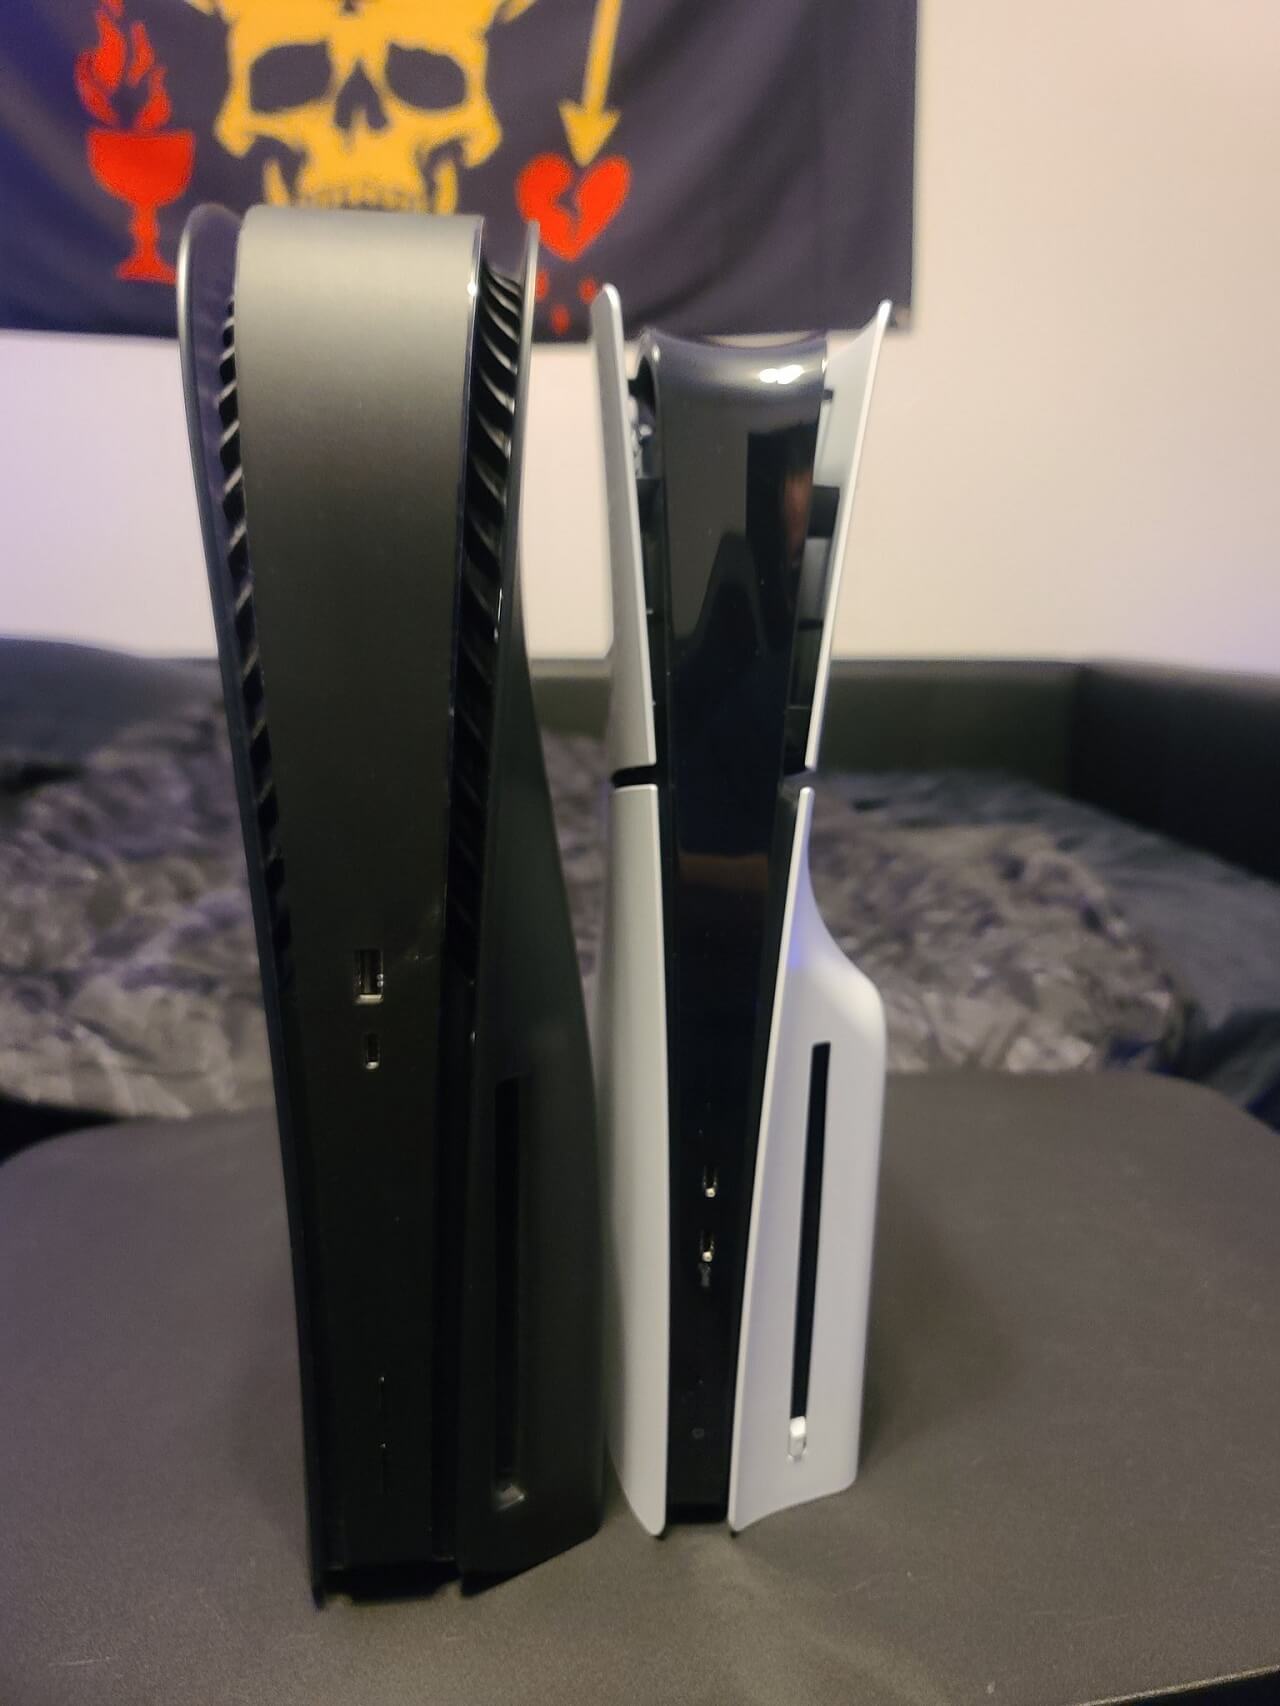 1698909537 370 Comparison between Old PS5 and New Slim PS5 became a